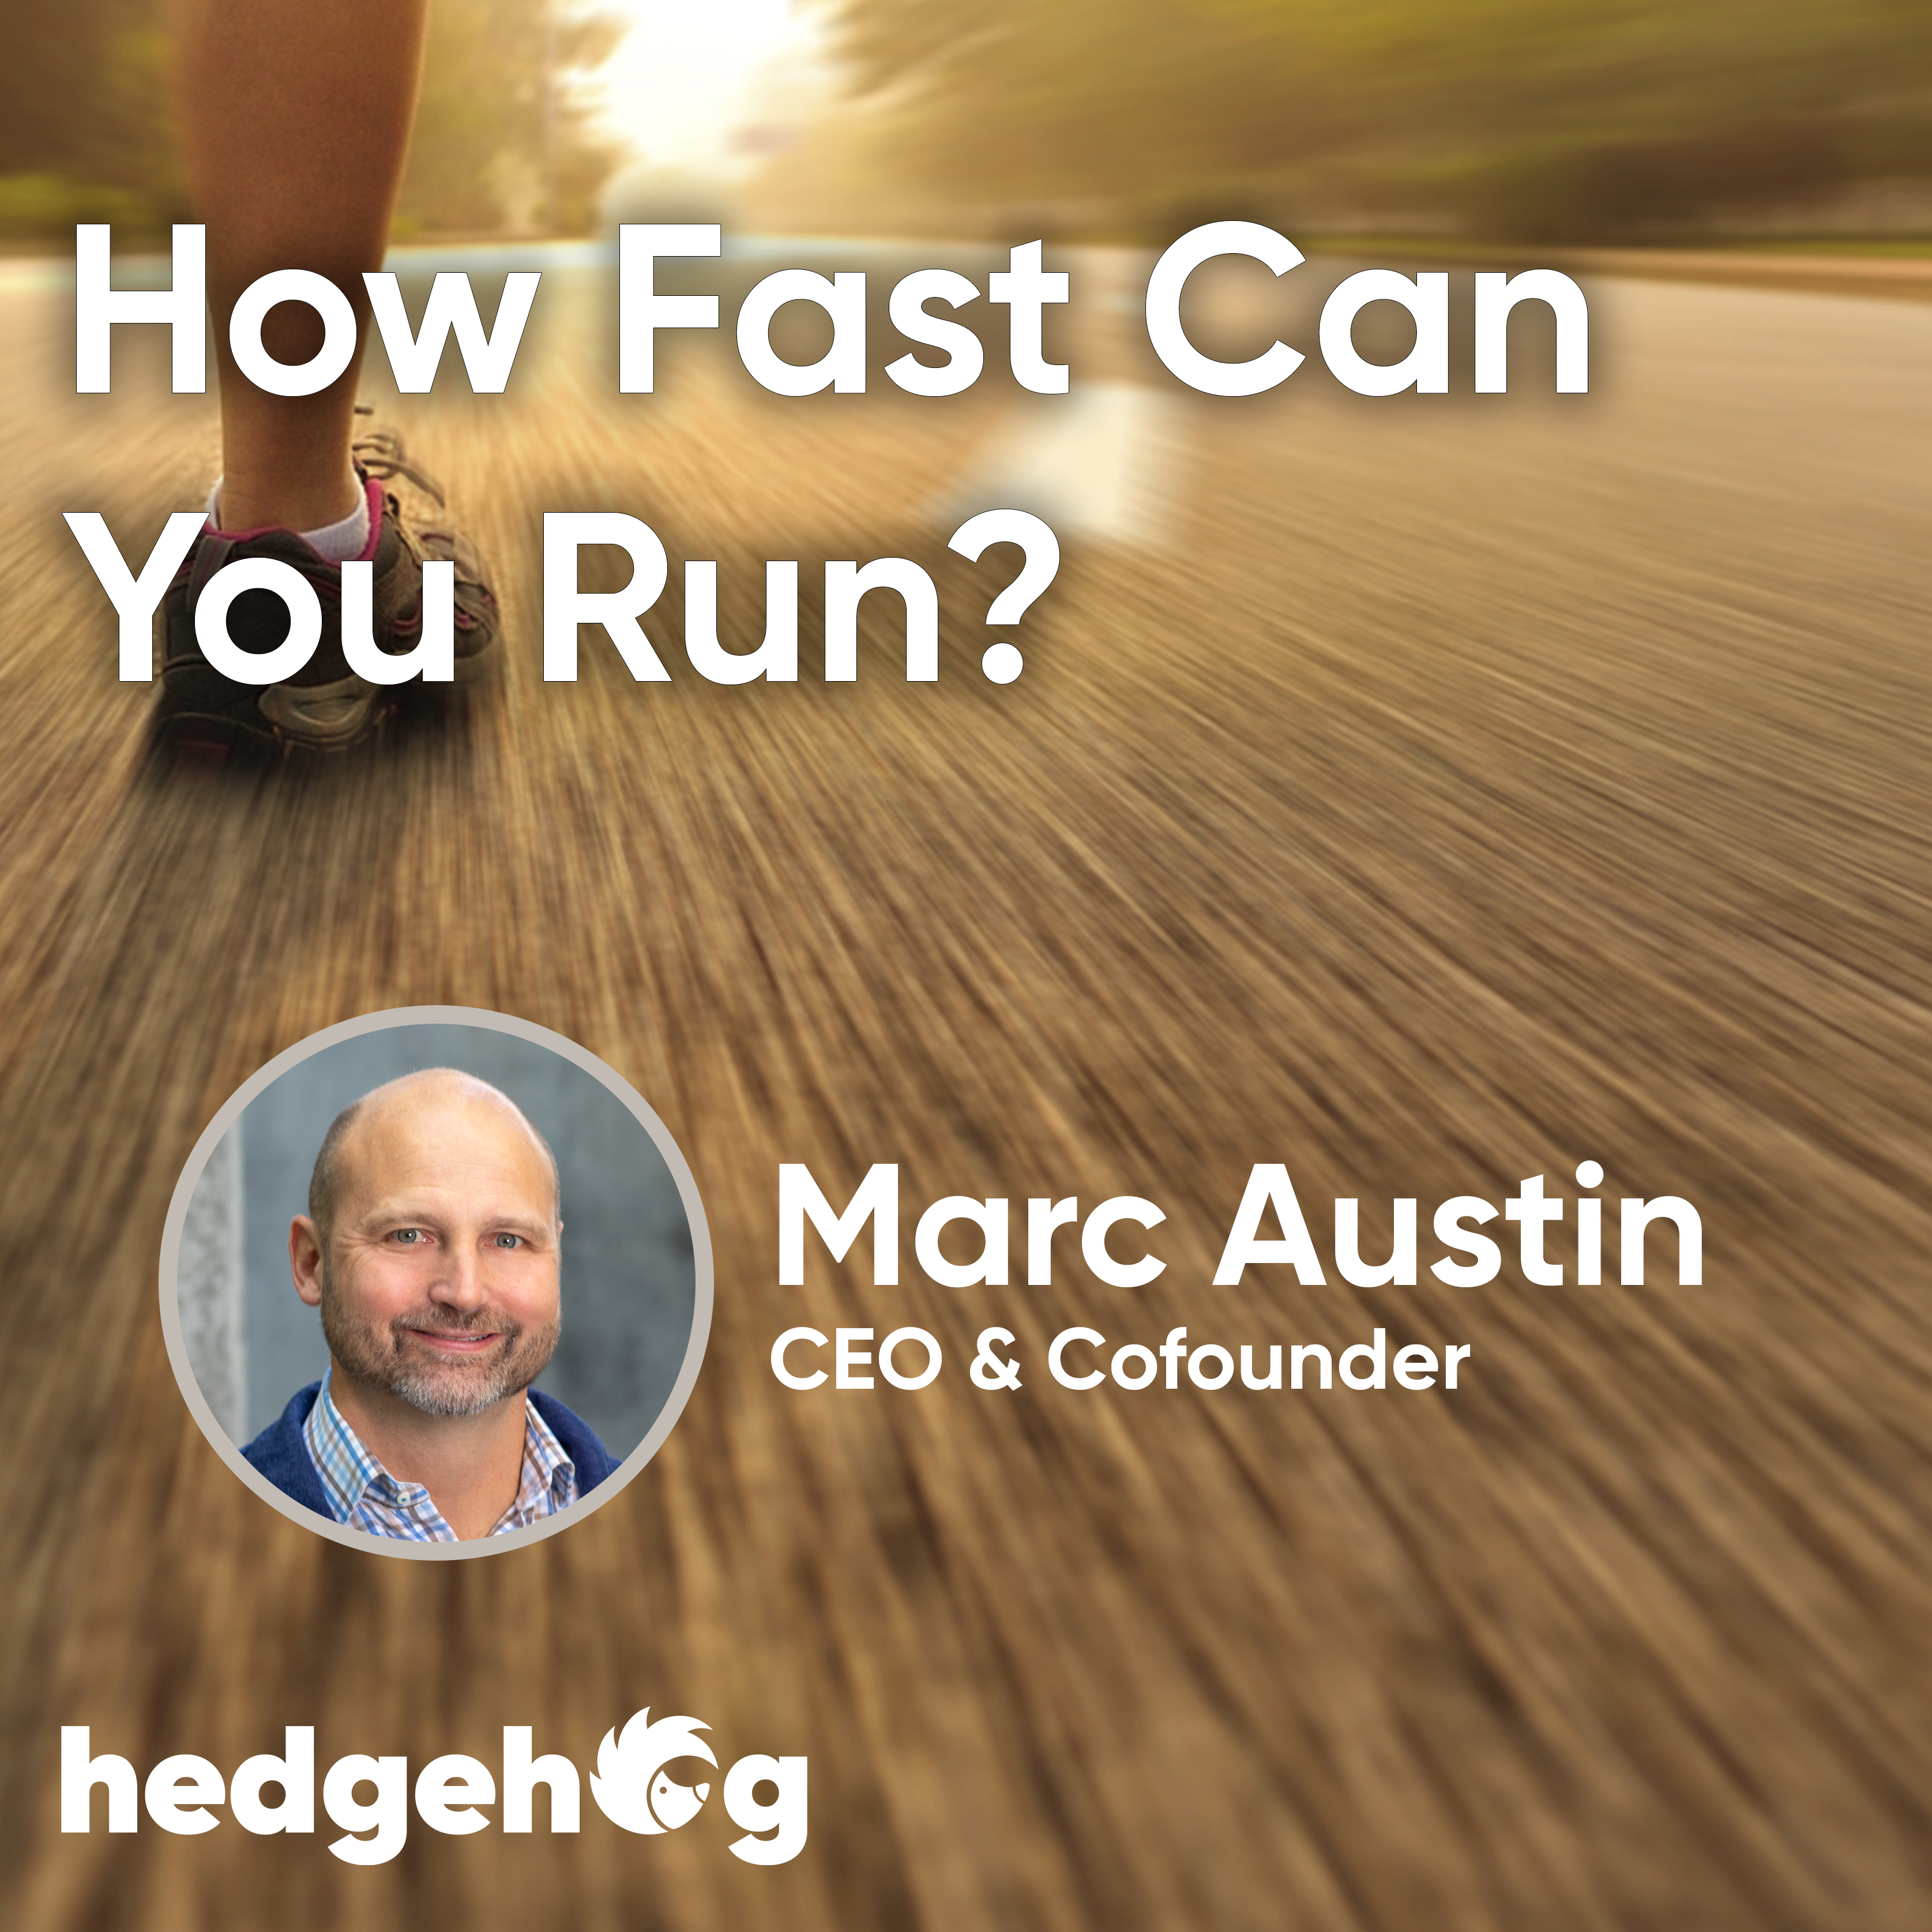 How fast can you run?